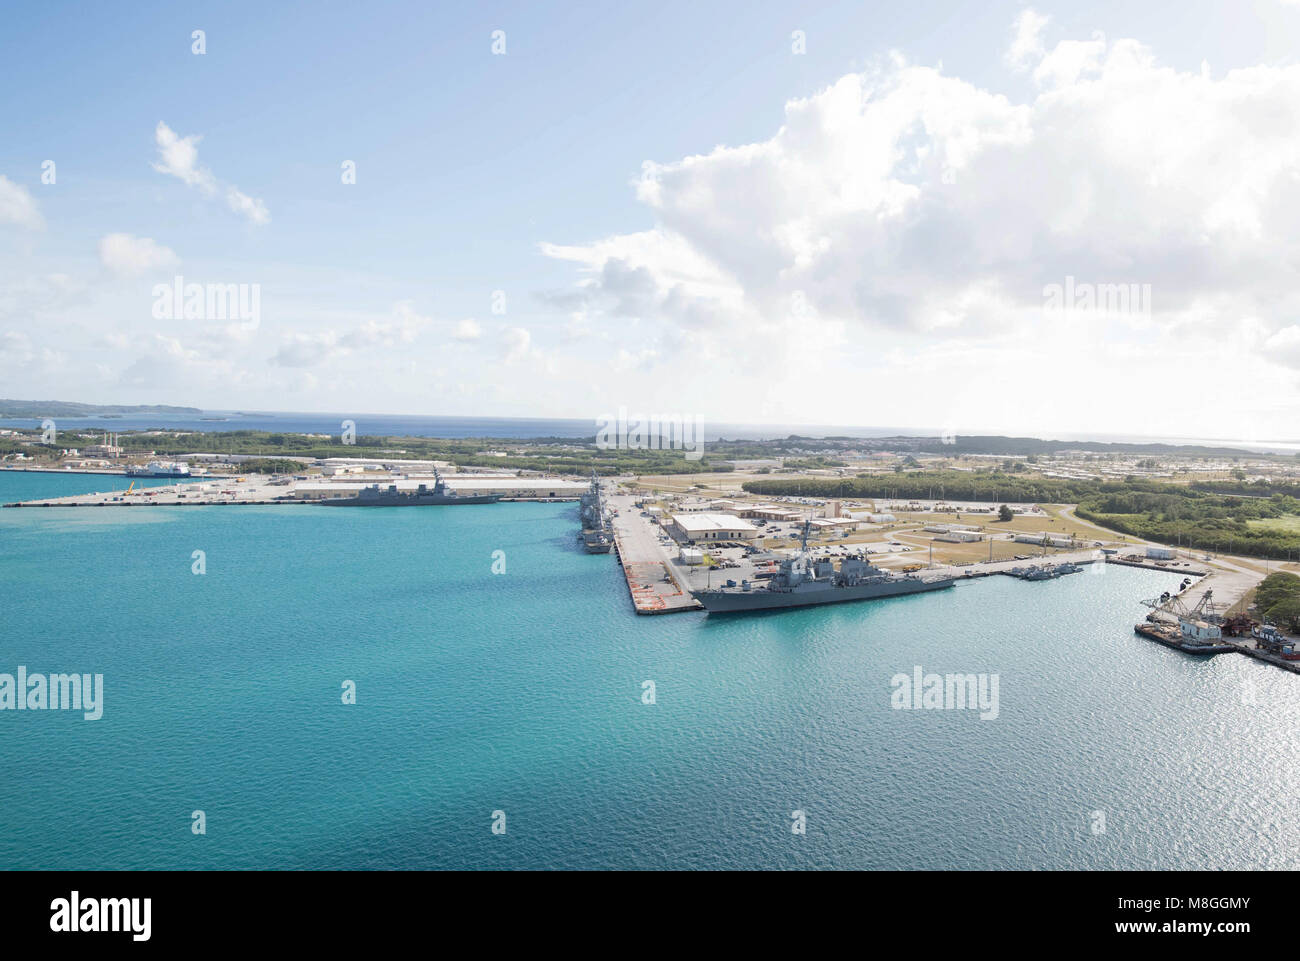 An aerial view of U.S. Naval Base Guam shows several Navy vessels moored in Apra Harbor, March 15. Some of the vessels are in Guam in support of Multi-Sail 2018 and Pacific Partnership 2018. This year also marks the 75th anniversary of the establishment of U.S. 7th Fleet. (U.S. Navy Combat Camera photo by Mass Communication Specialist 1st Class Stacy D. Laseter) Stock Photo